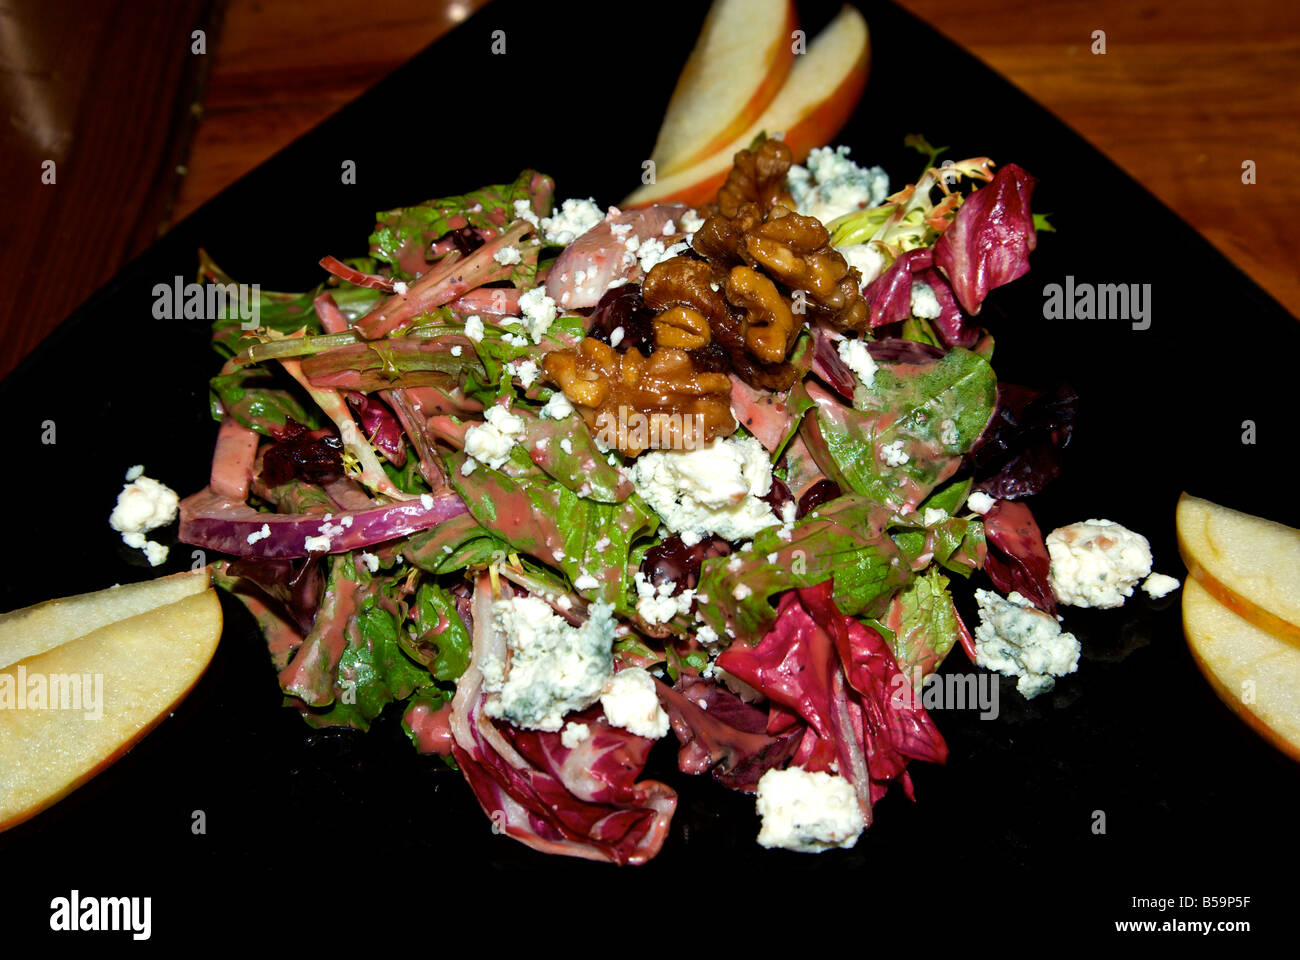 Green salad with arugula radicchio red onion endive topped with candied walnuts and blue cheese on a black plate Stock Photo